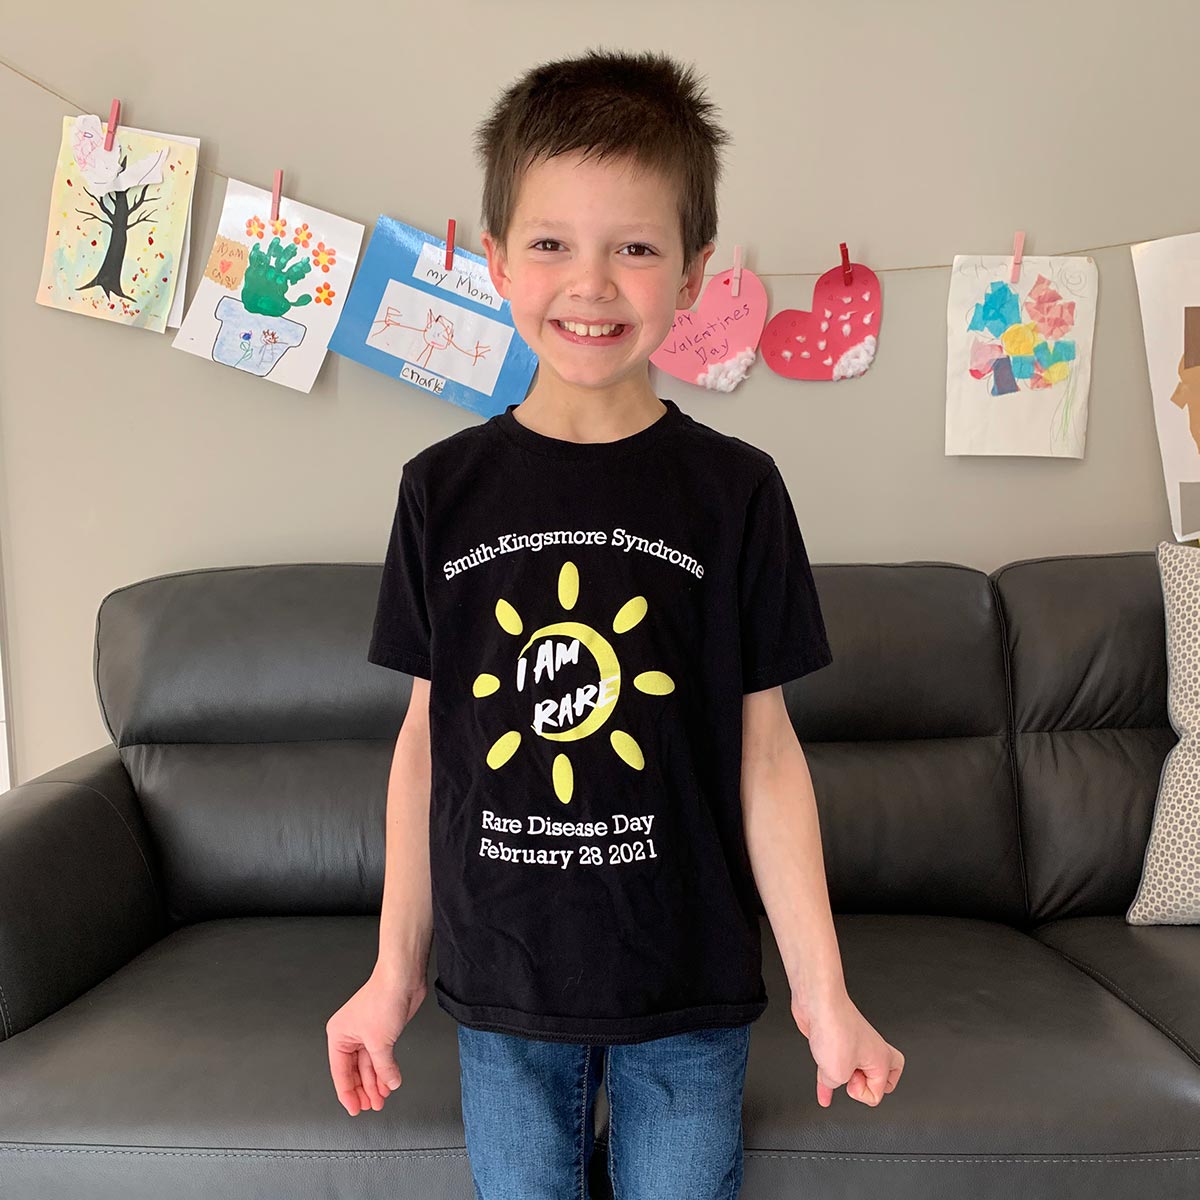 Meet Charlie Wilson, 9, one of our patients with a #RareDisease, Smith-Kingsmore syndrome.  Charlie’s mom, Sarah Lepore, is a @UVaNICU NP who helps raise money for research as a @SmithKingsmore board member. #RareDiseaseDay